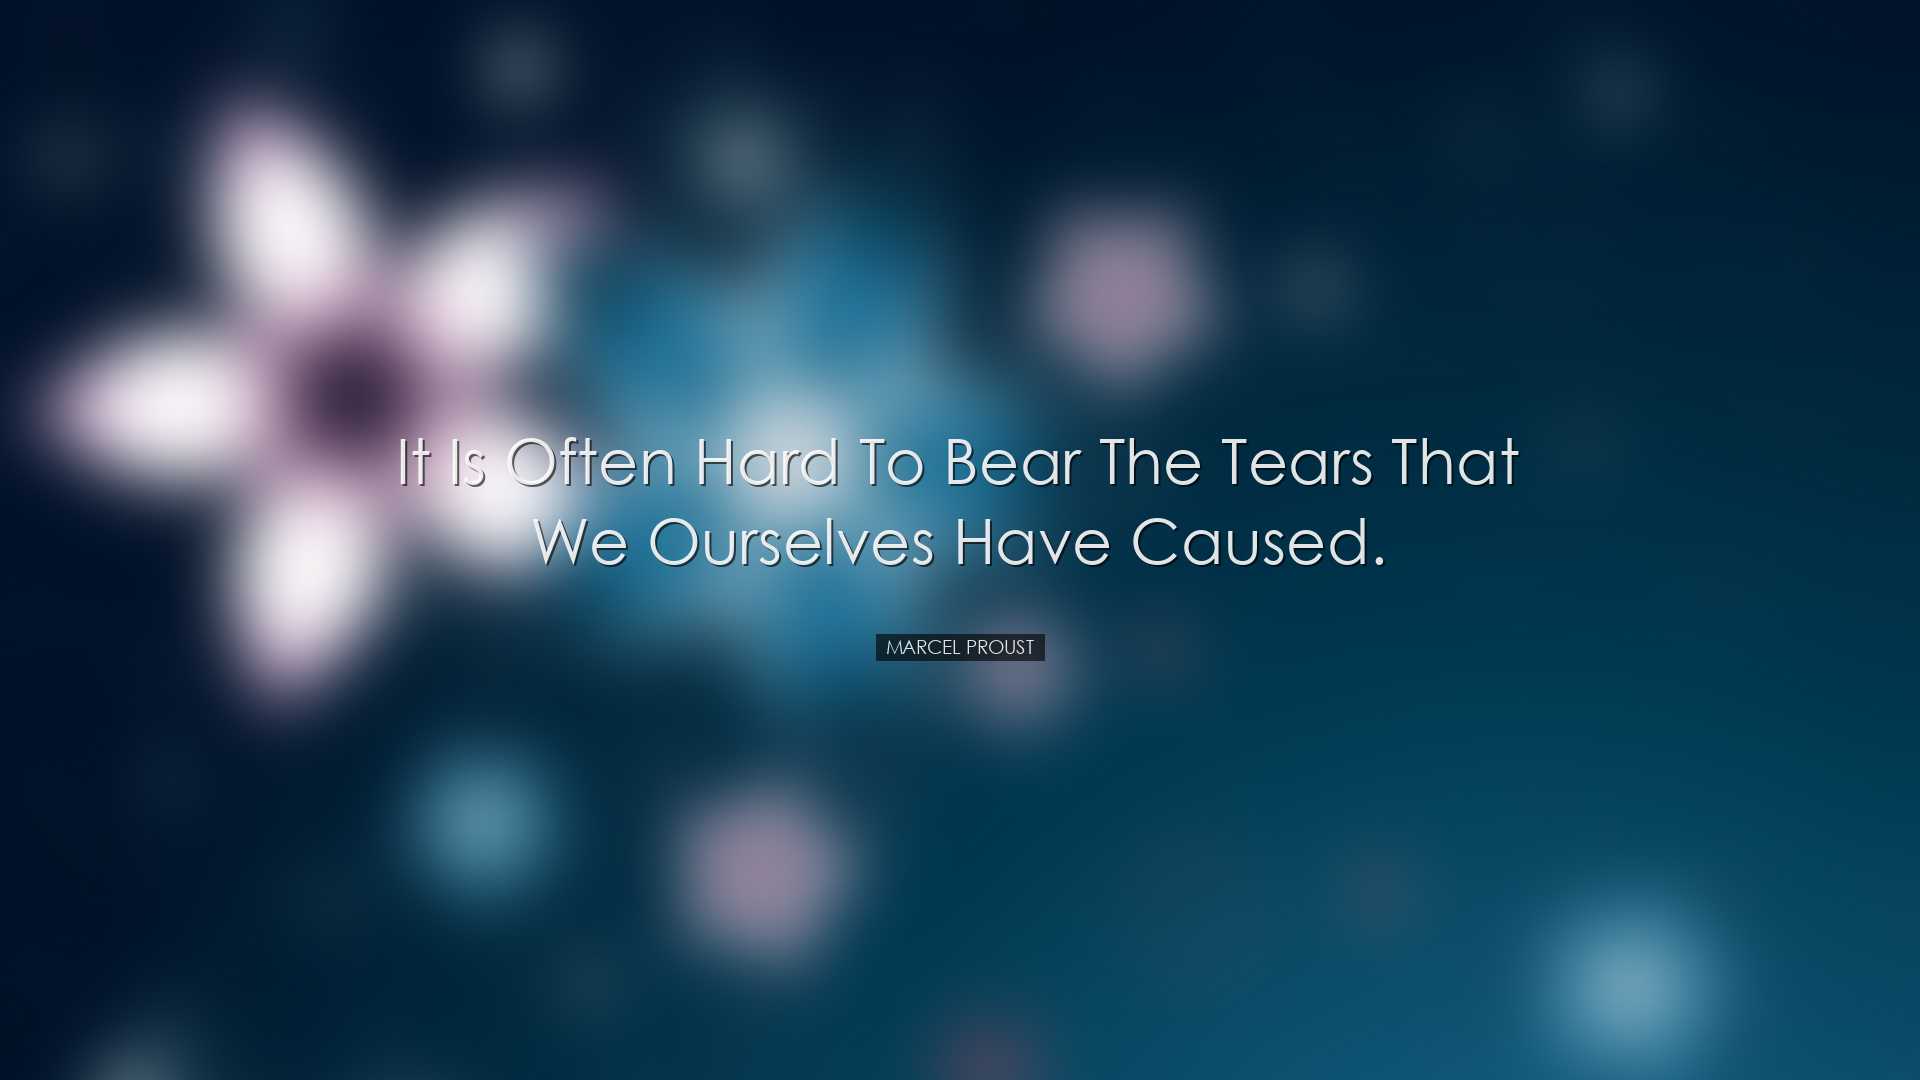 It is often hard to bear the tears that we ourselves have caused.